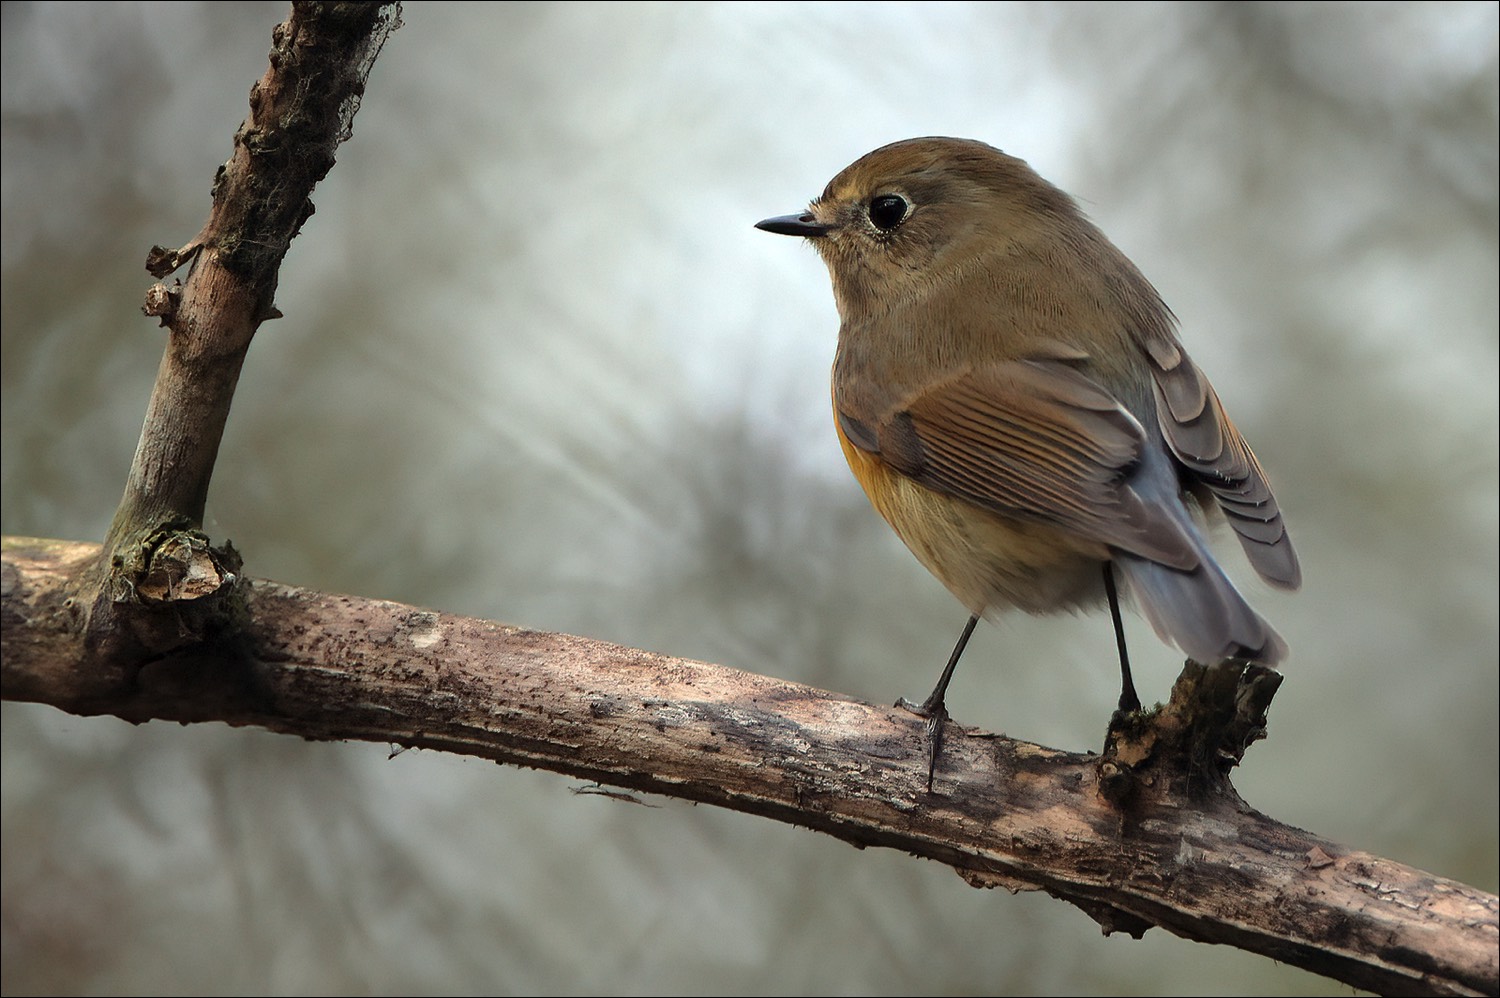 Red-flanked Bluetail (Blauwstaart)